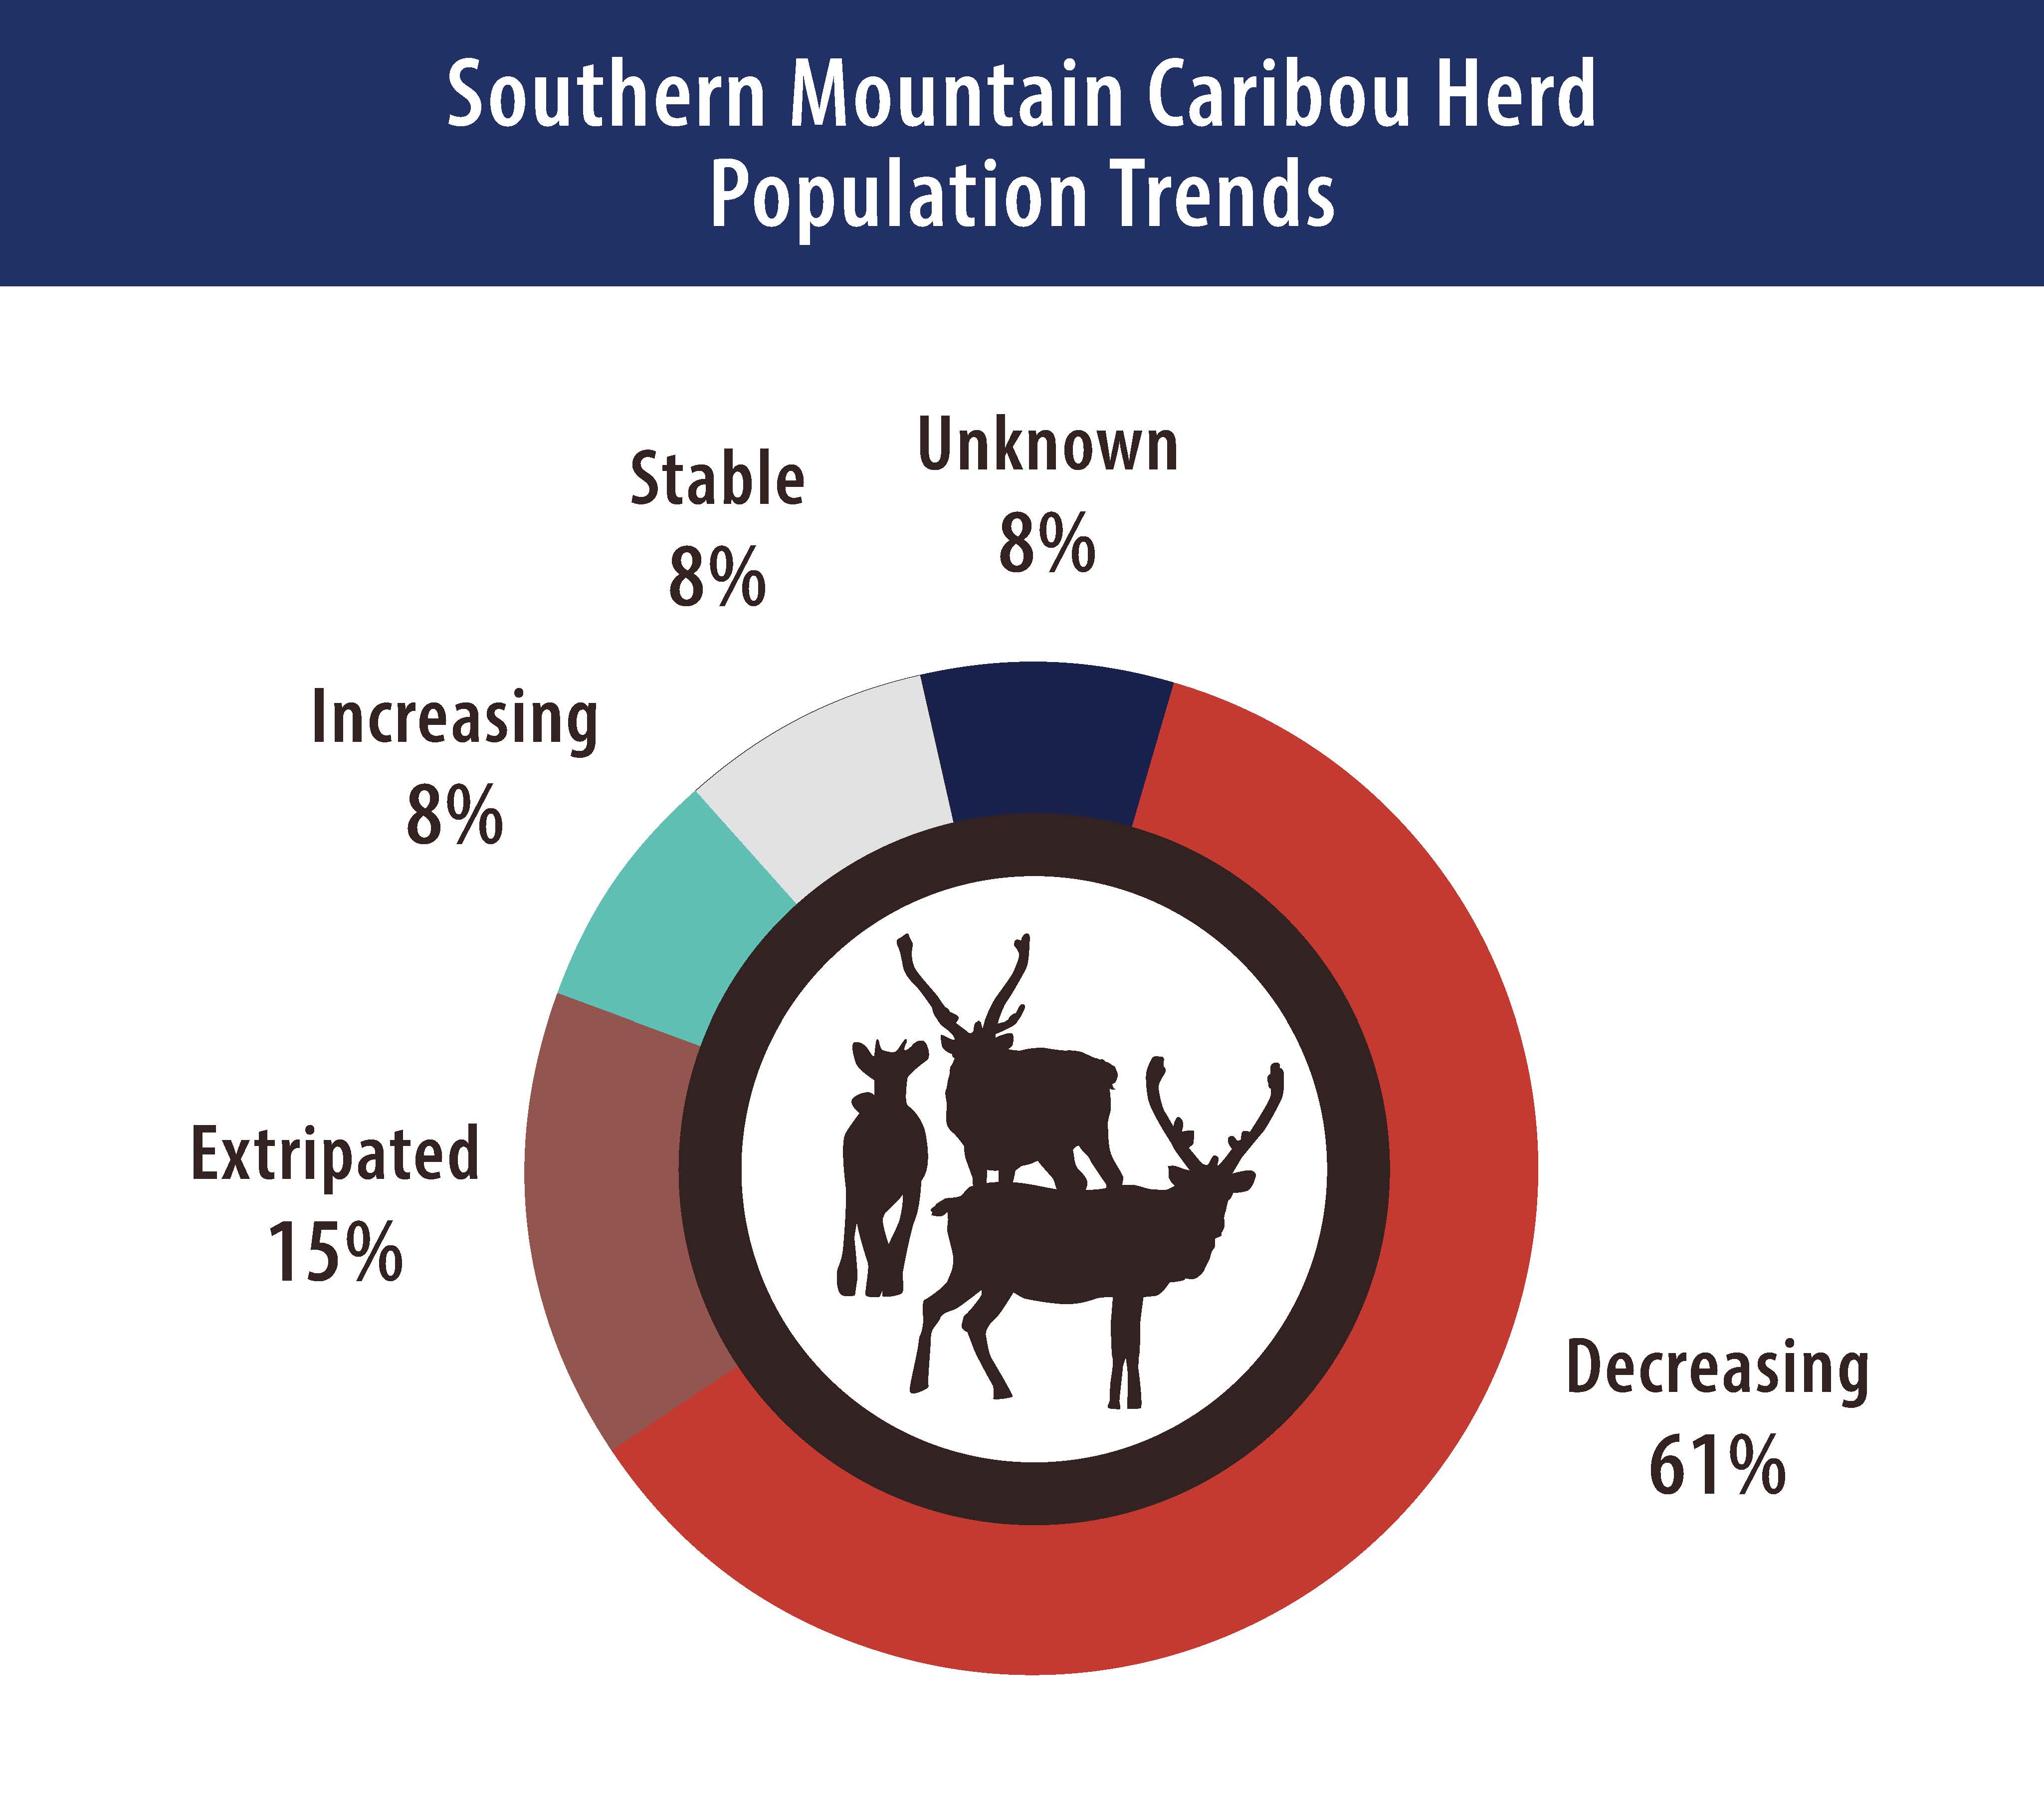 A breakdown of the population trends for all southern mountain caribou herds